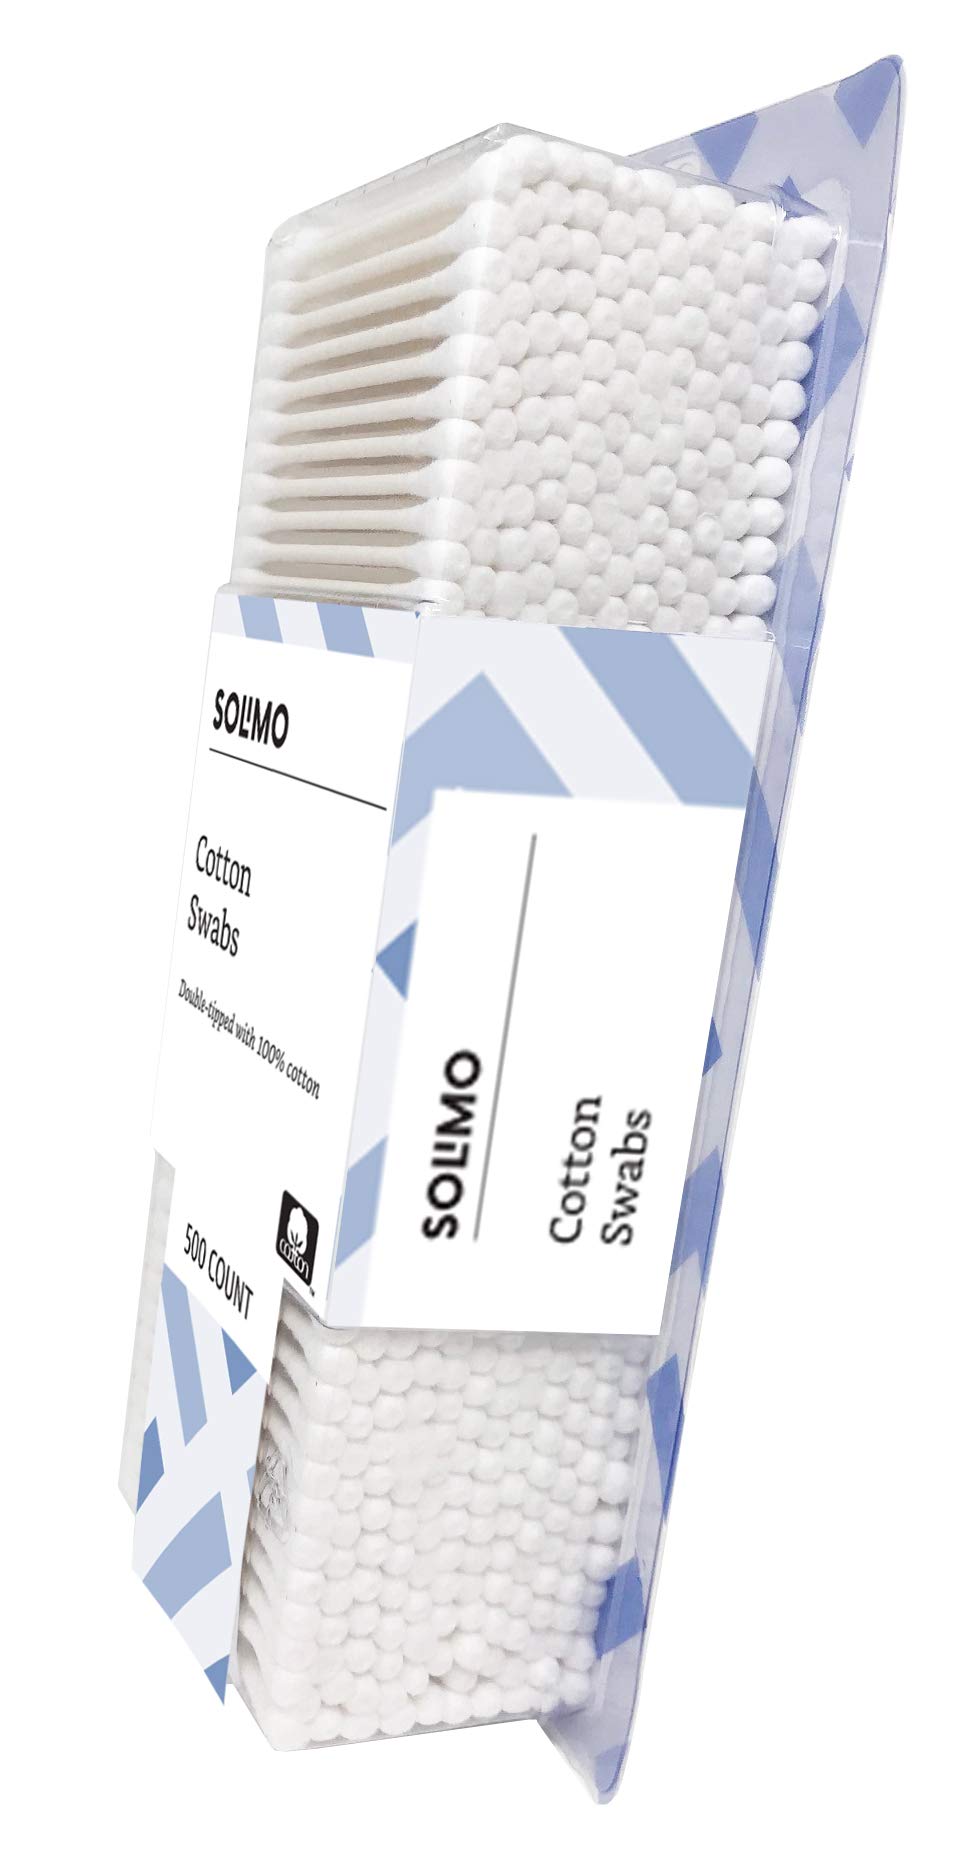 Amazon Brand - Solimo Cotton Swabs, 500ct (Pack of 4)